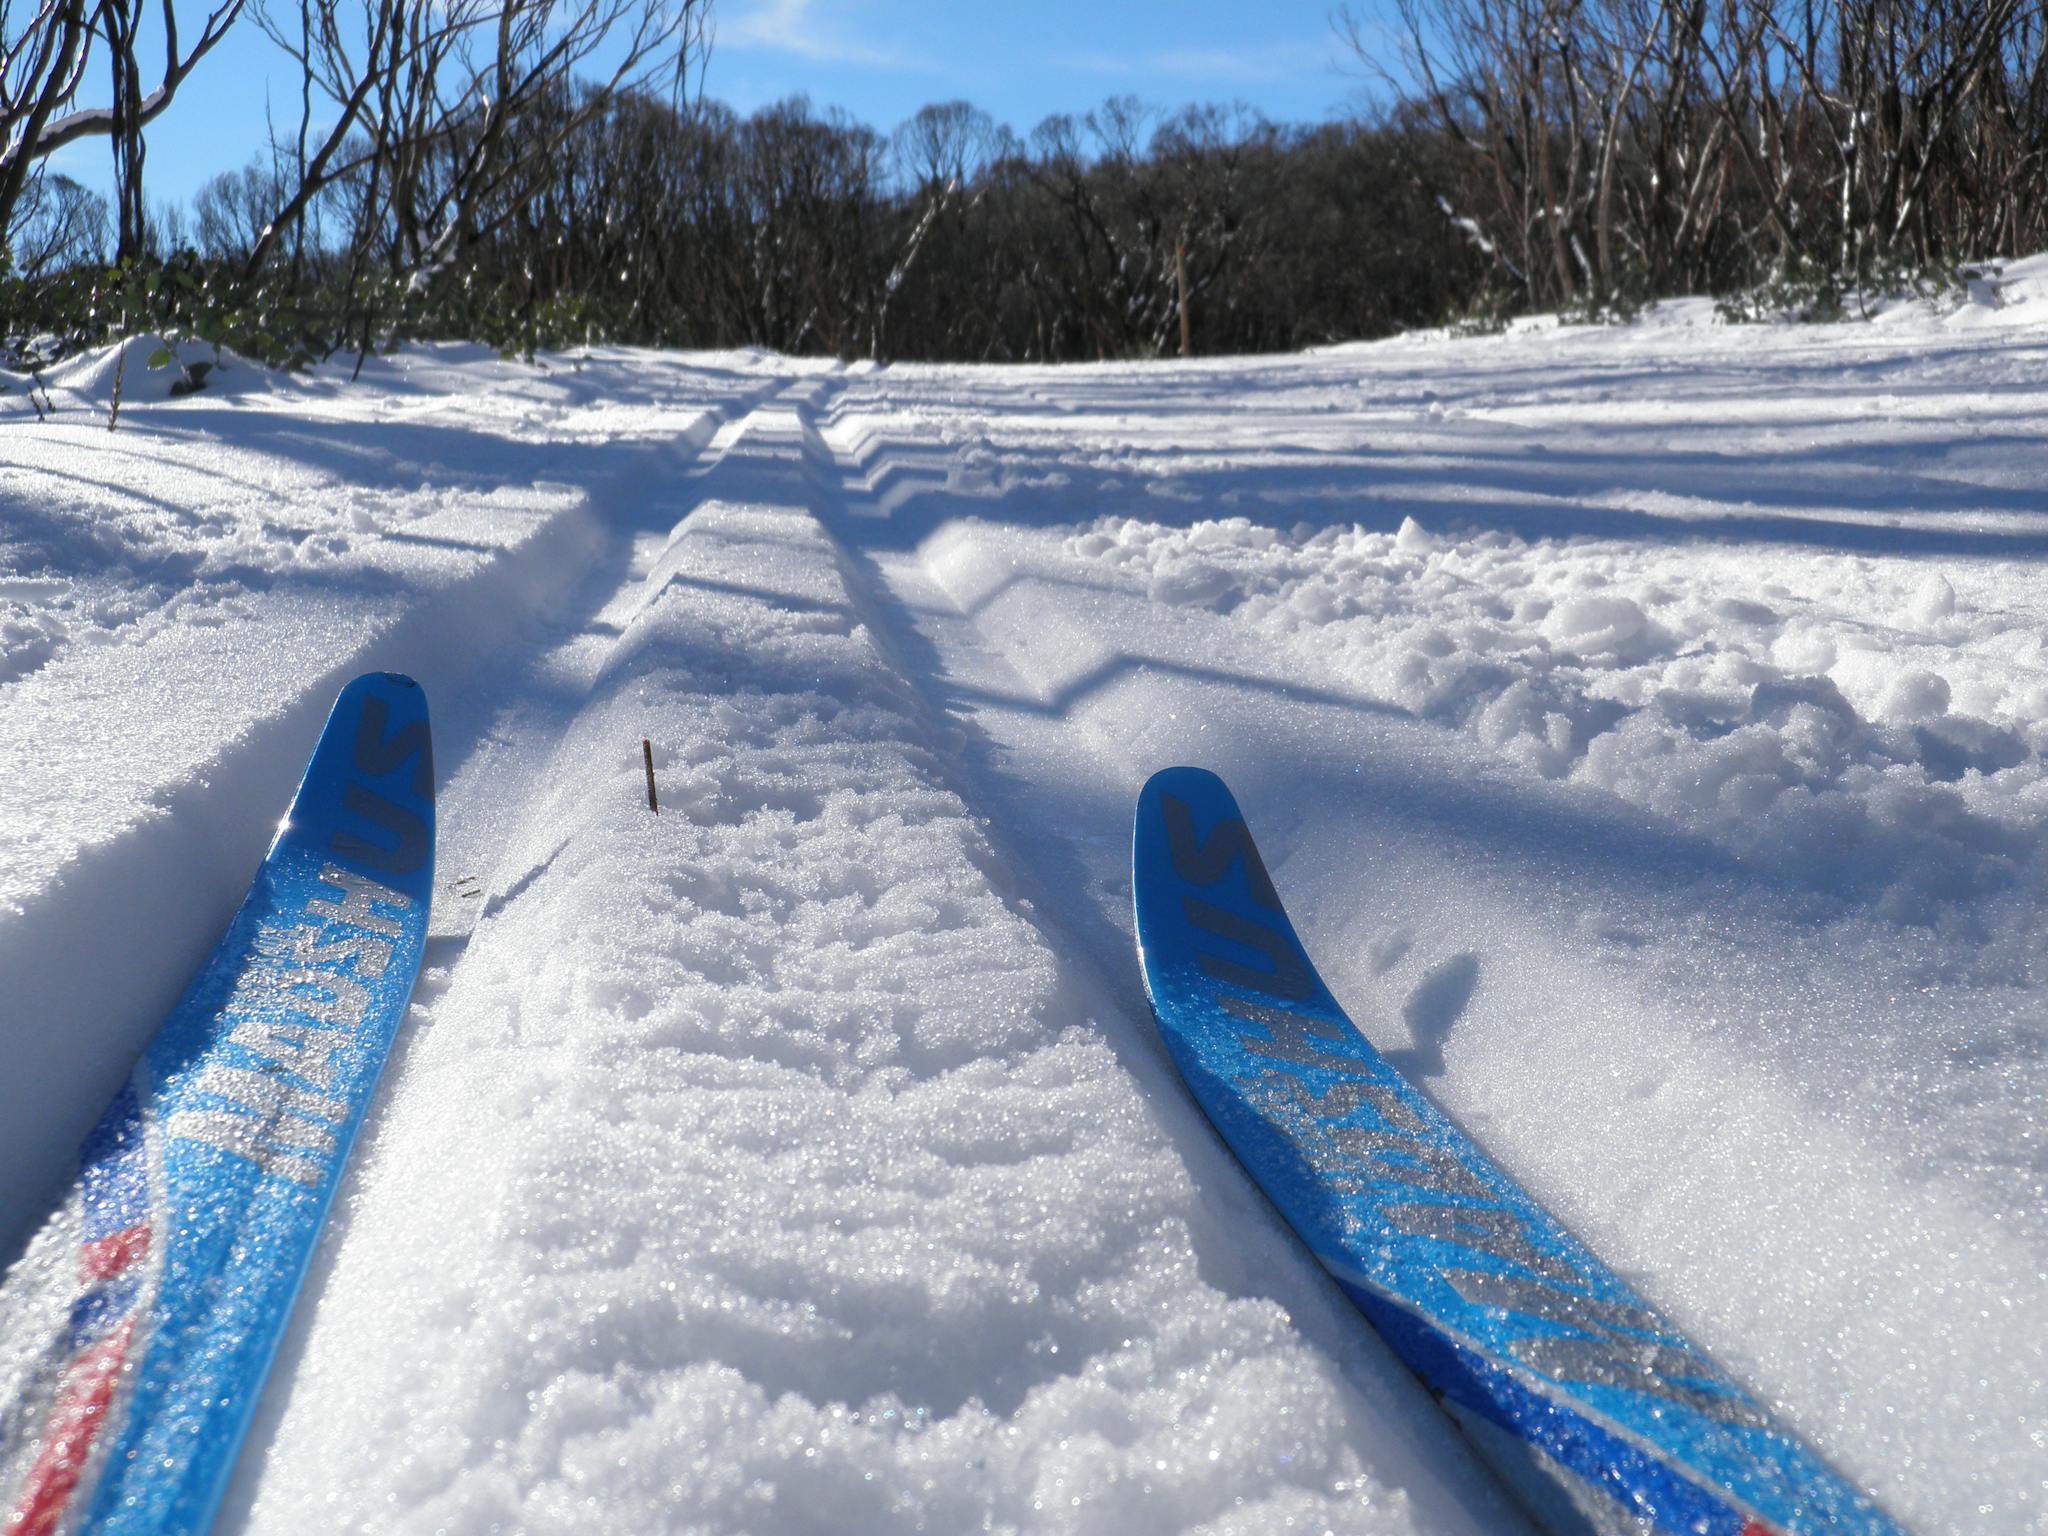 Sunny day skiing on the groomed ski trails